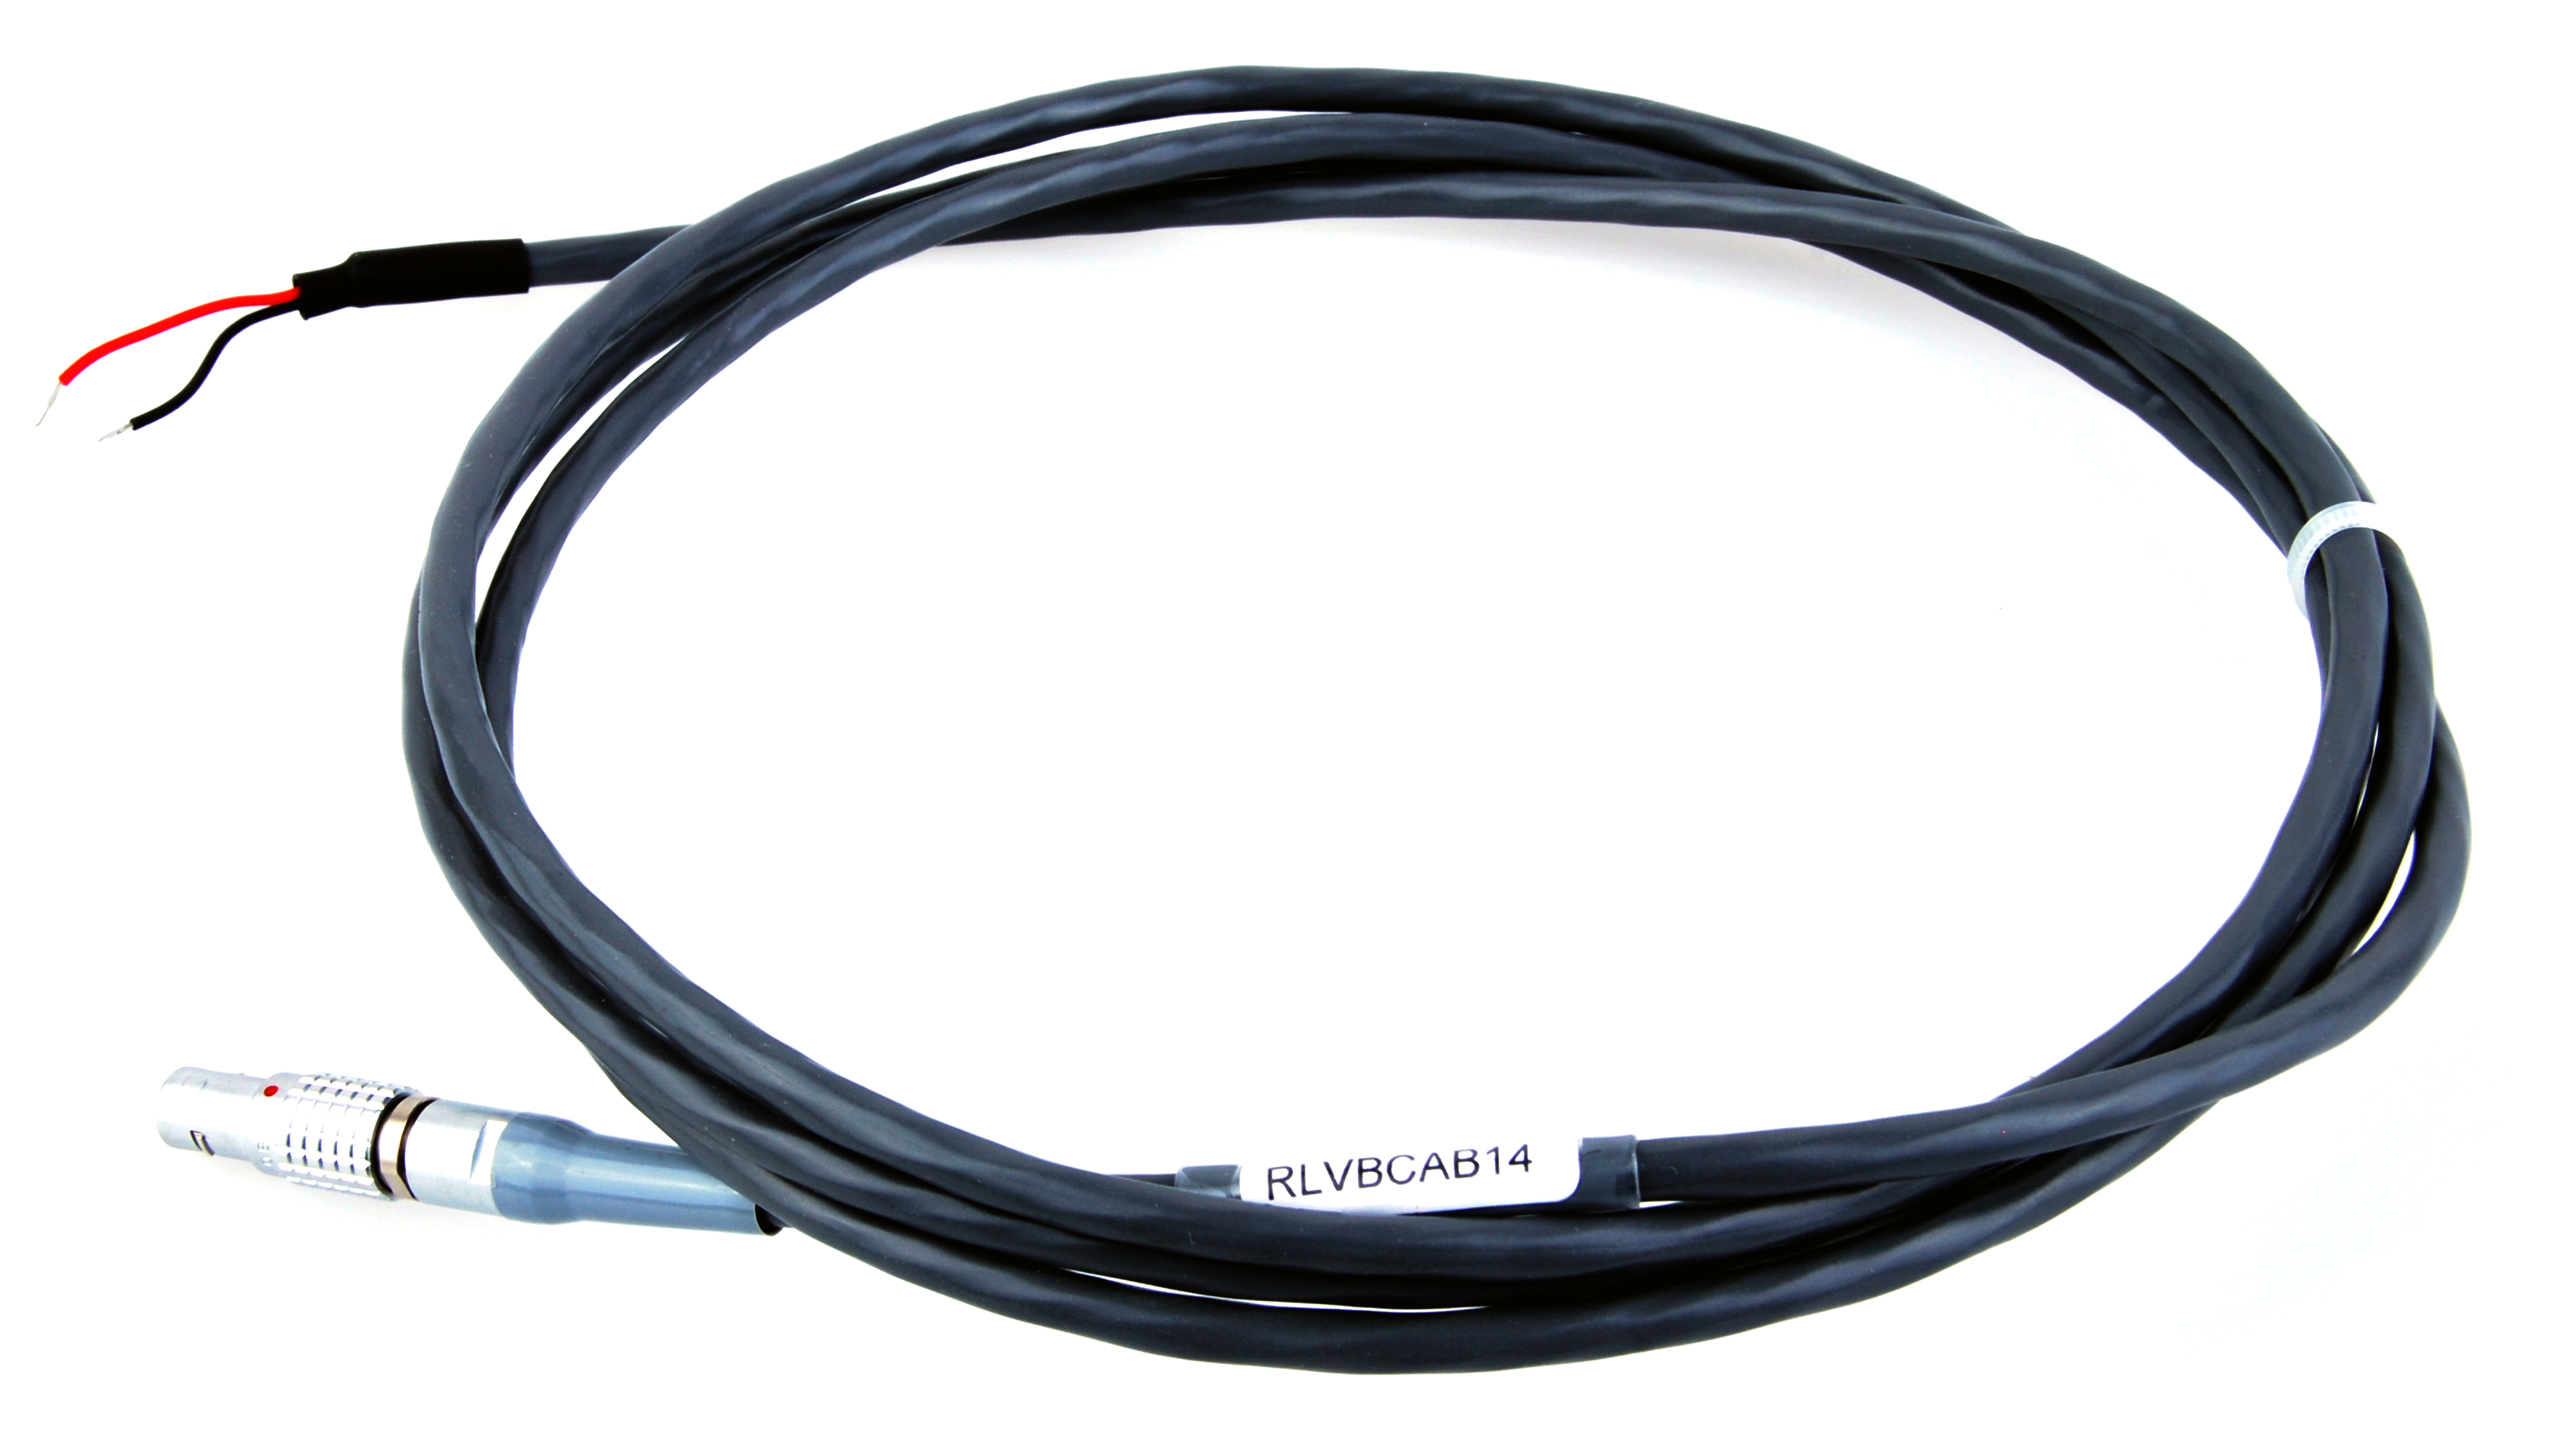 RLVBCAB15-Lemo-unterminated power cable.png